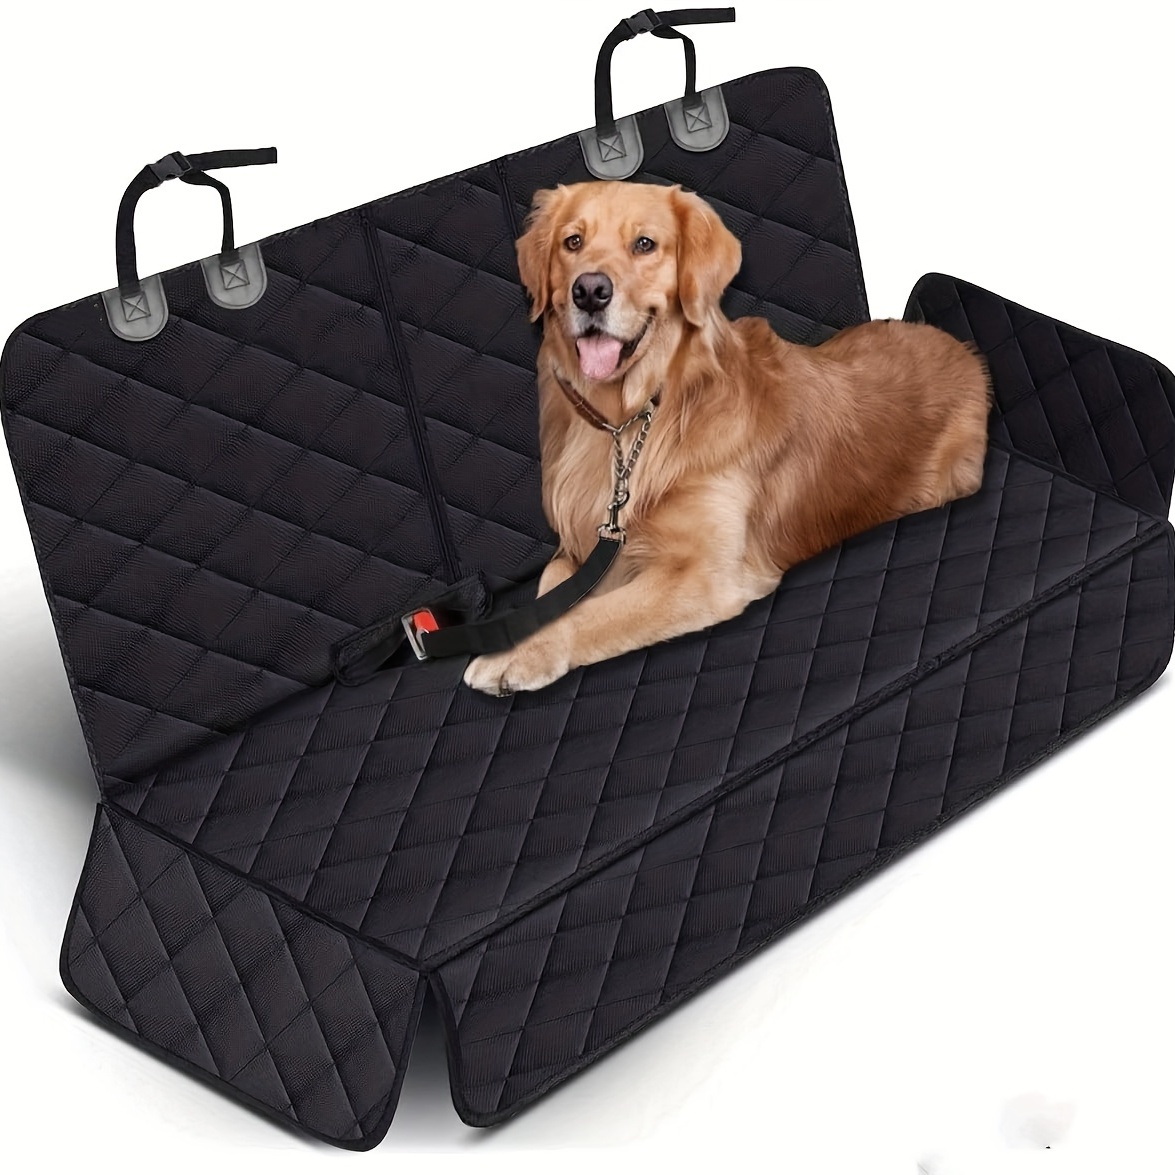 

Protect Your Car Seats From Pet Hair & Messes With This Waterproof & Anti-slip Dog Car Seat Cover!